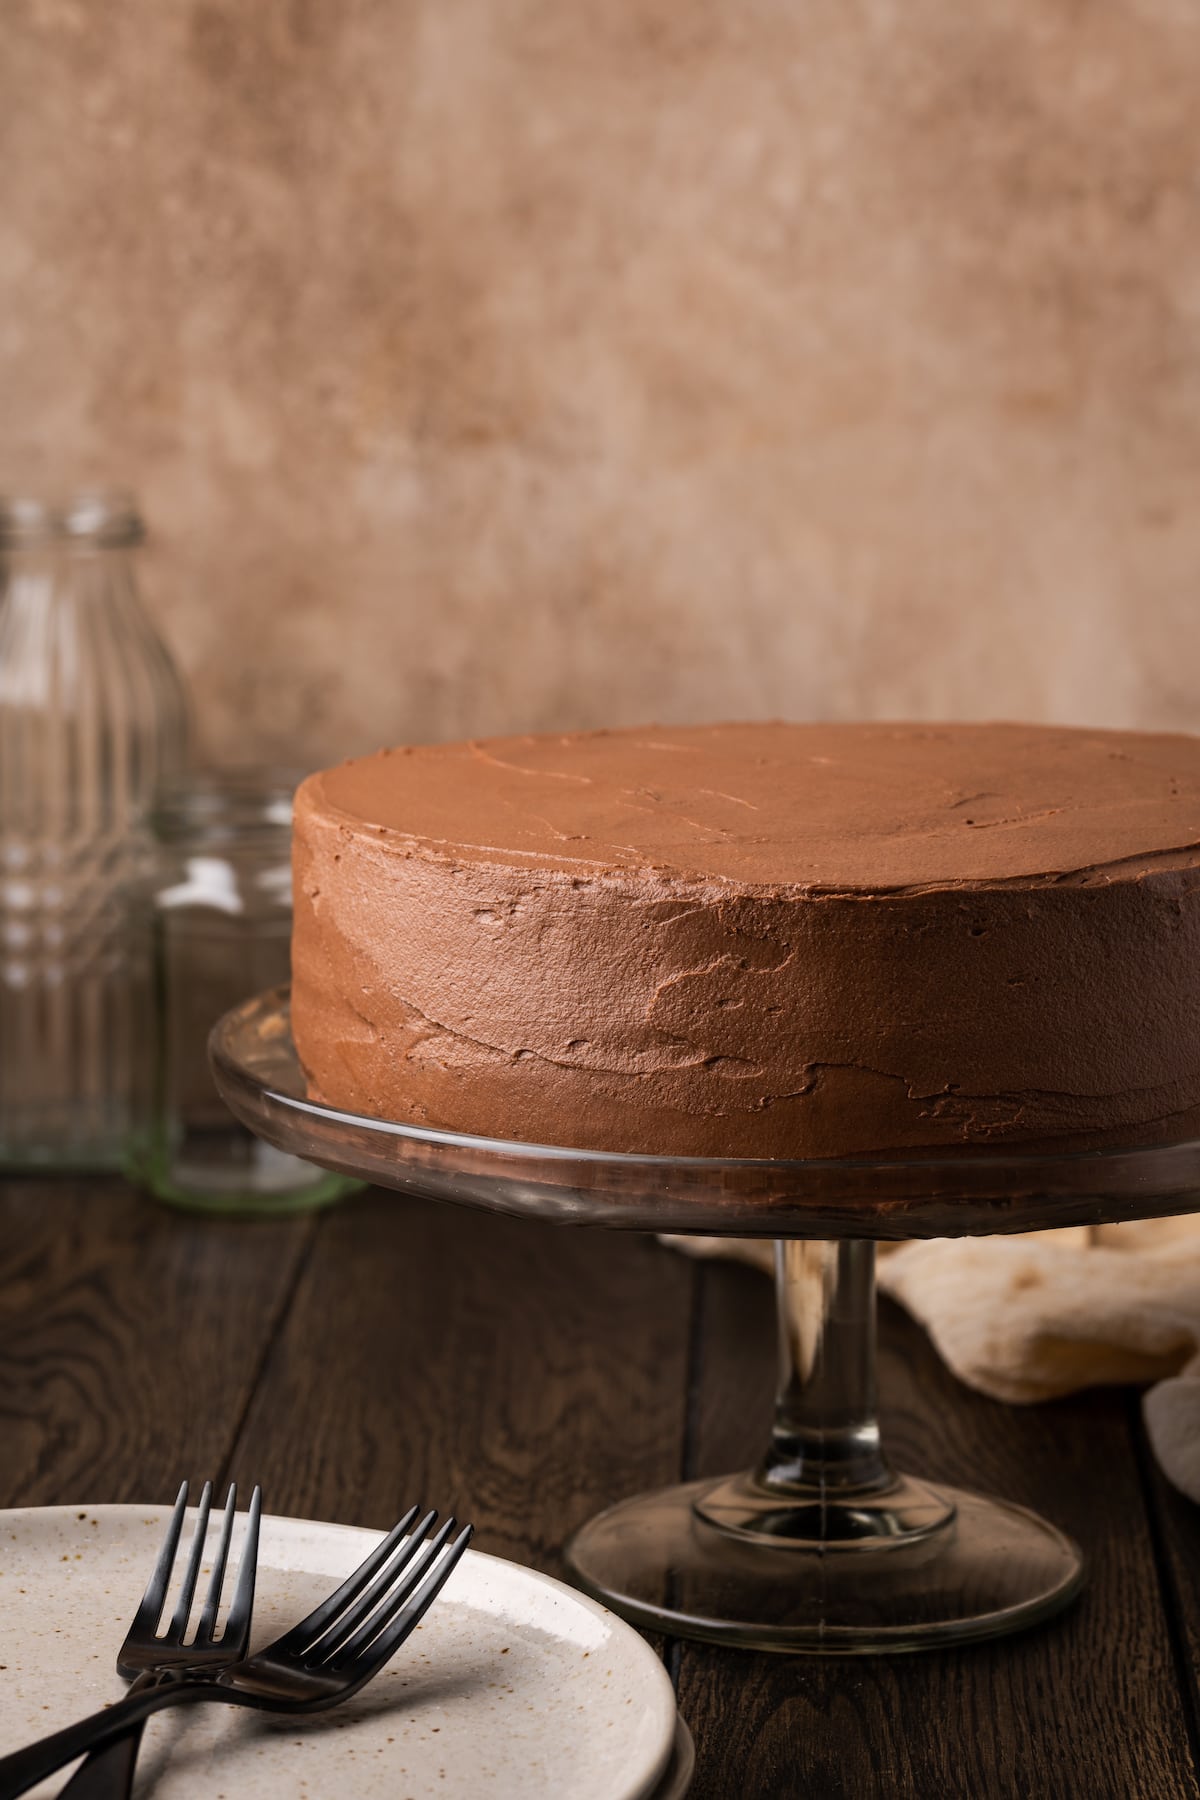 A frosted chocolate layer cake on a cake stand, next to a white plate with two forks.